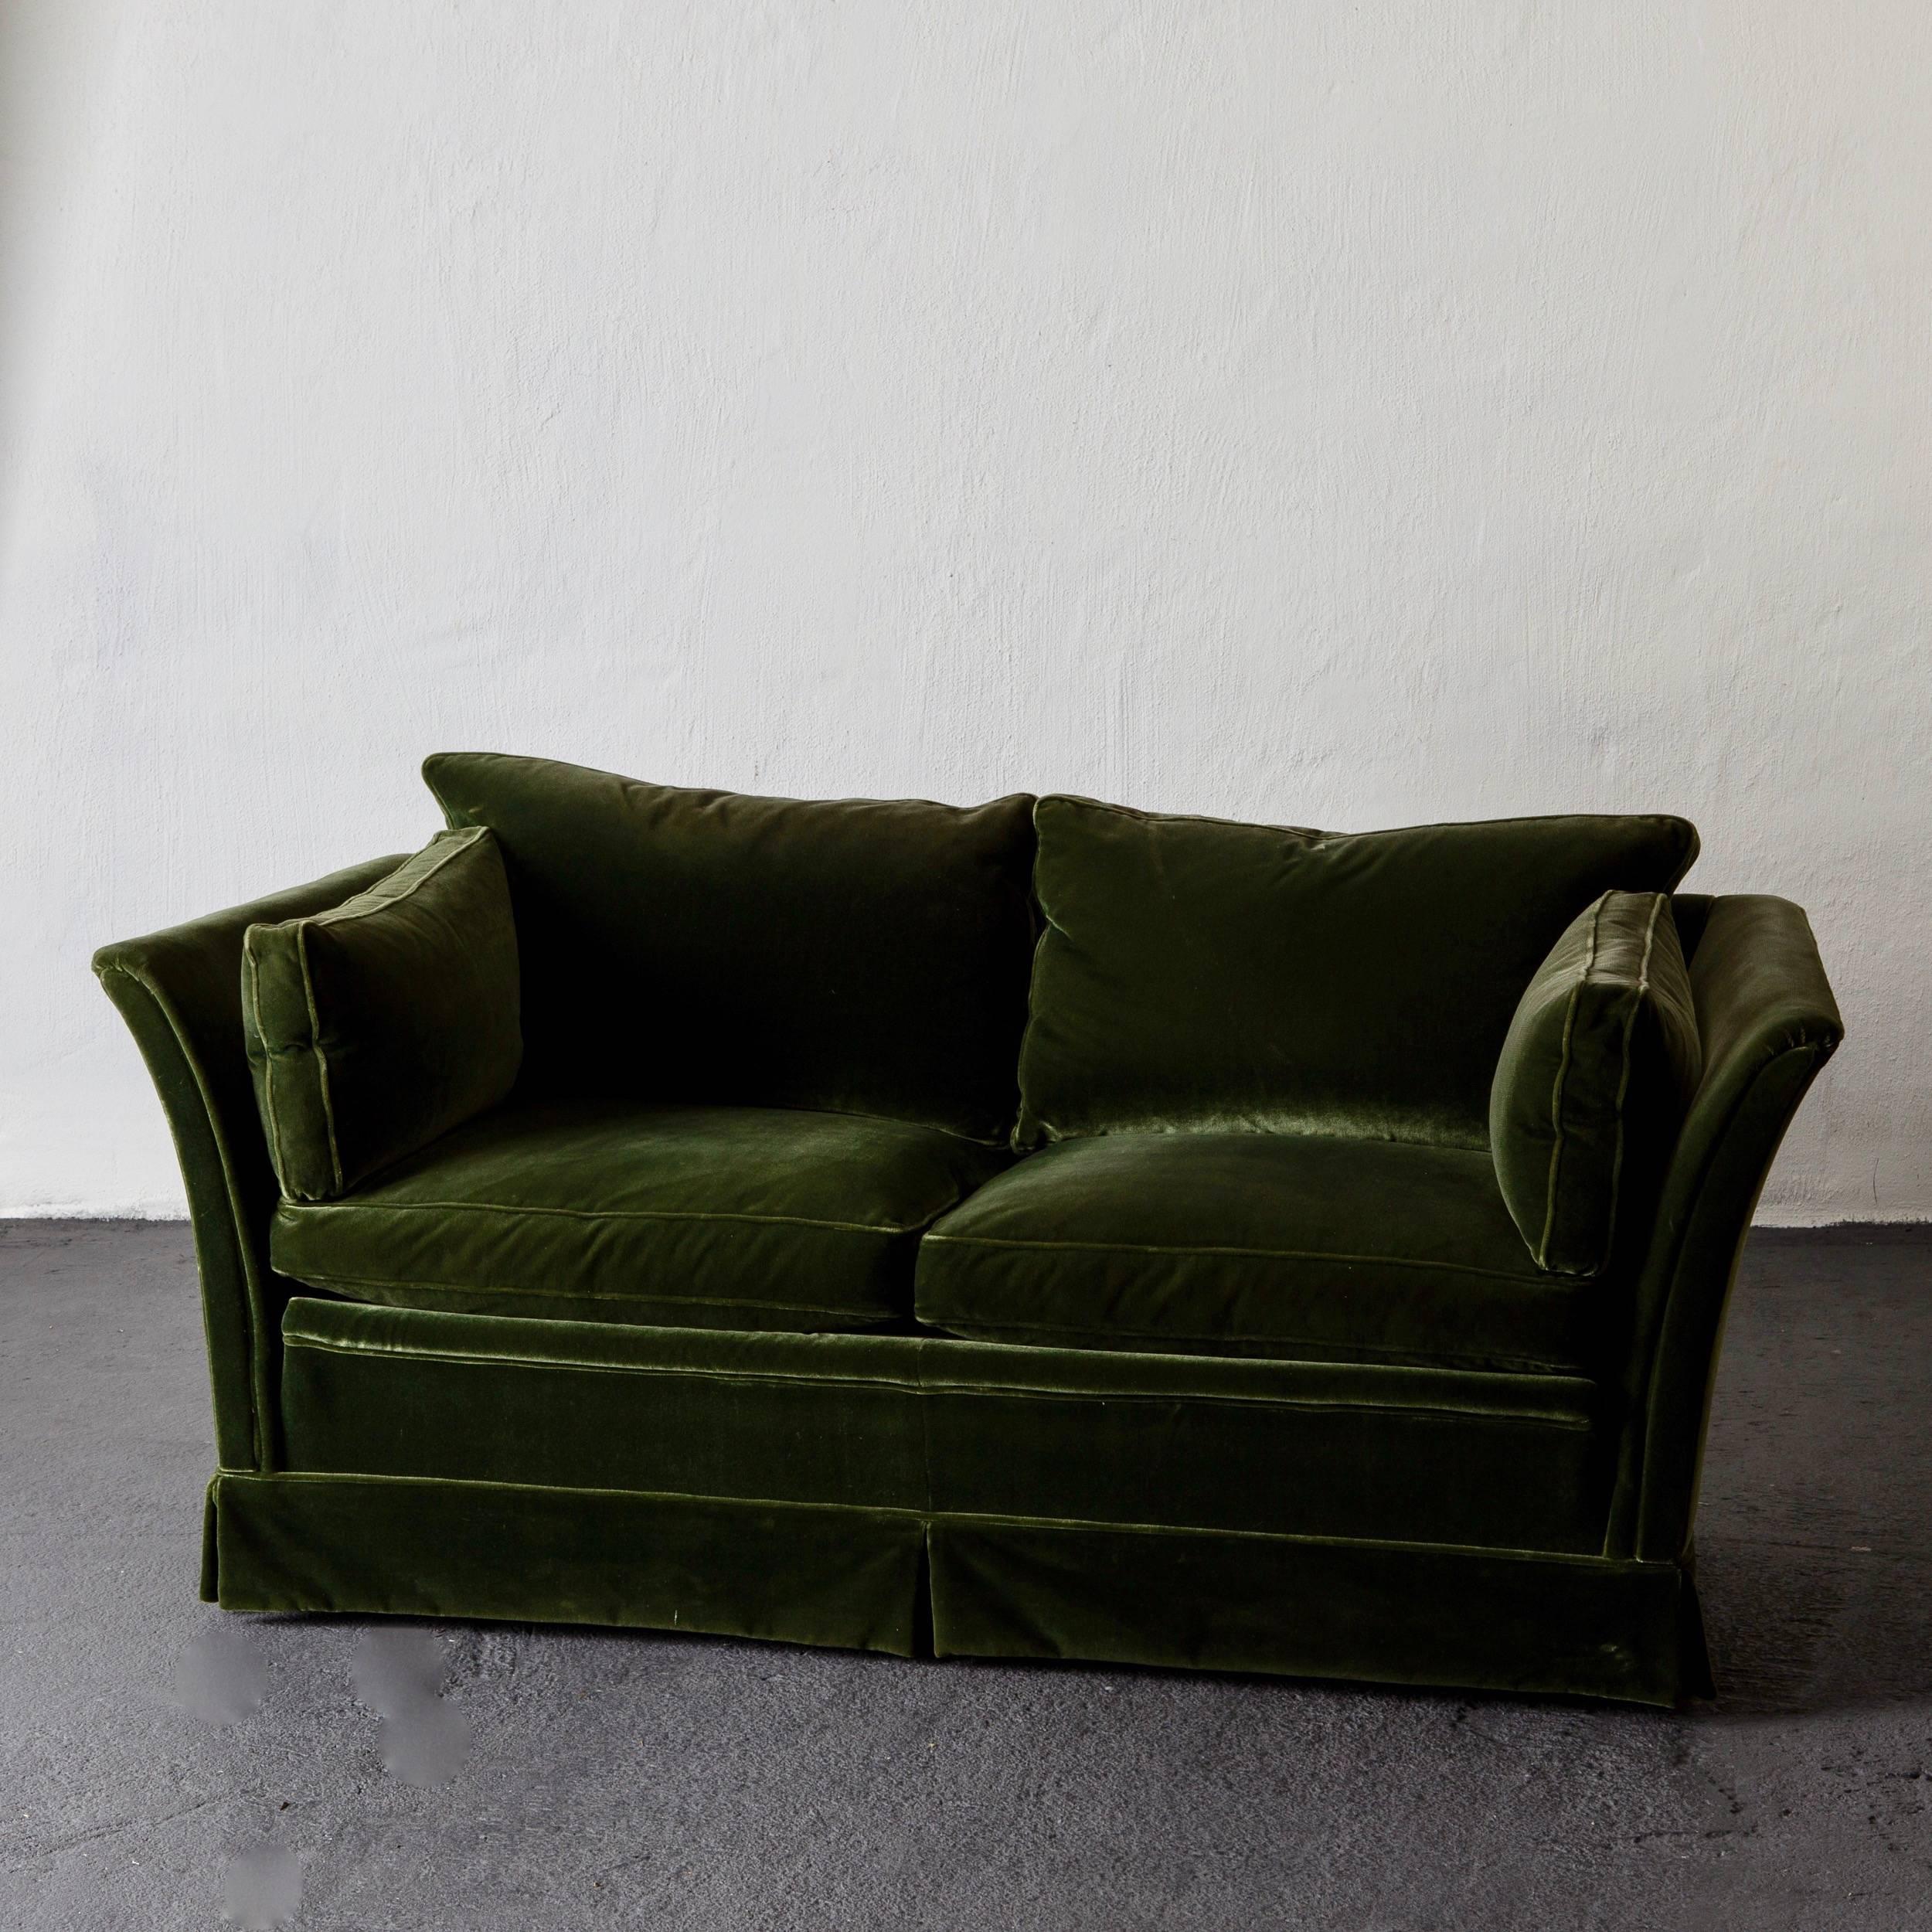 Sofa Swedish mid-20th century green velvet, Sweden. A sofa made during the 1950s in Sweden. Upholstered in dark green velvet. Loose cushions in back and seat and armrests.